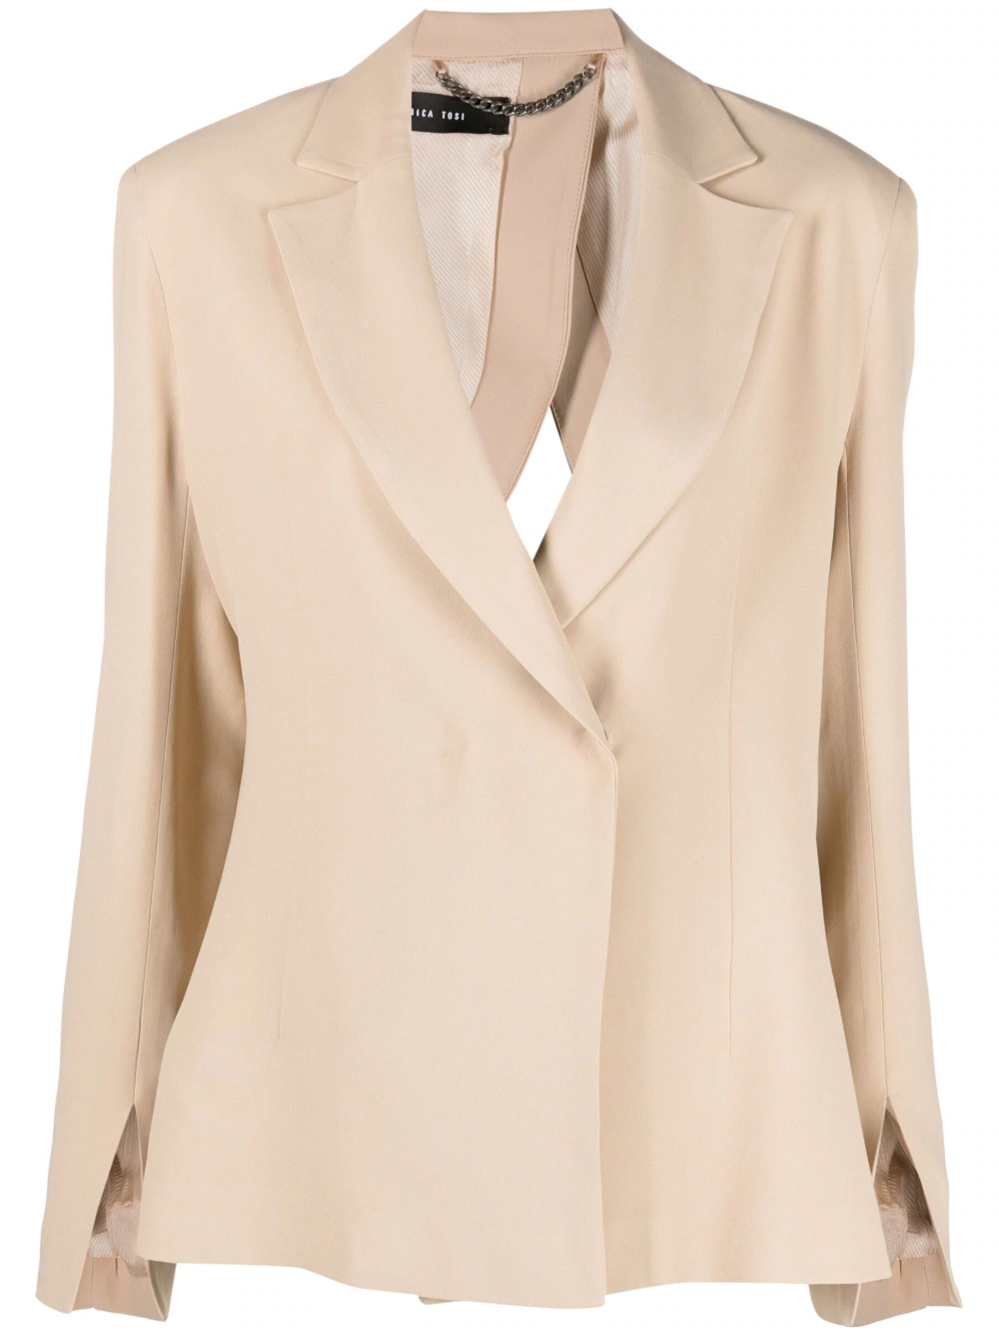 FEDERICA TOSI CUT-OUT BLAZER ON THE BACK